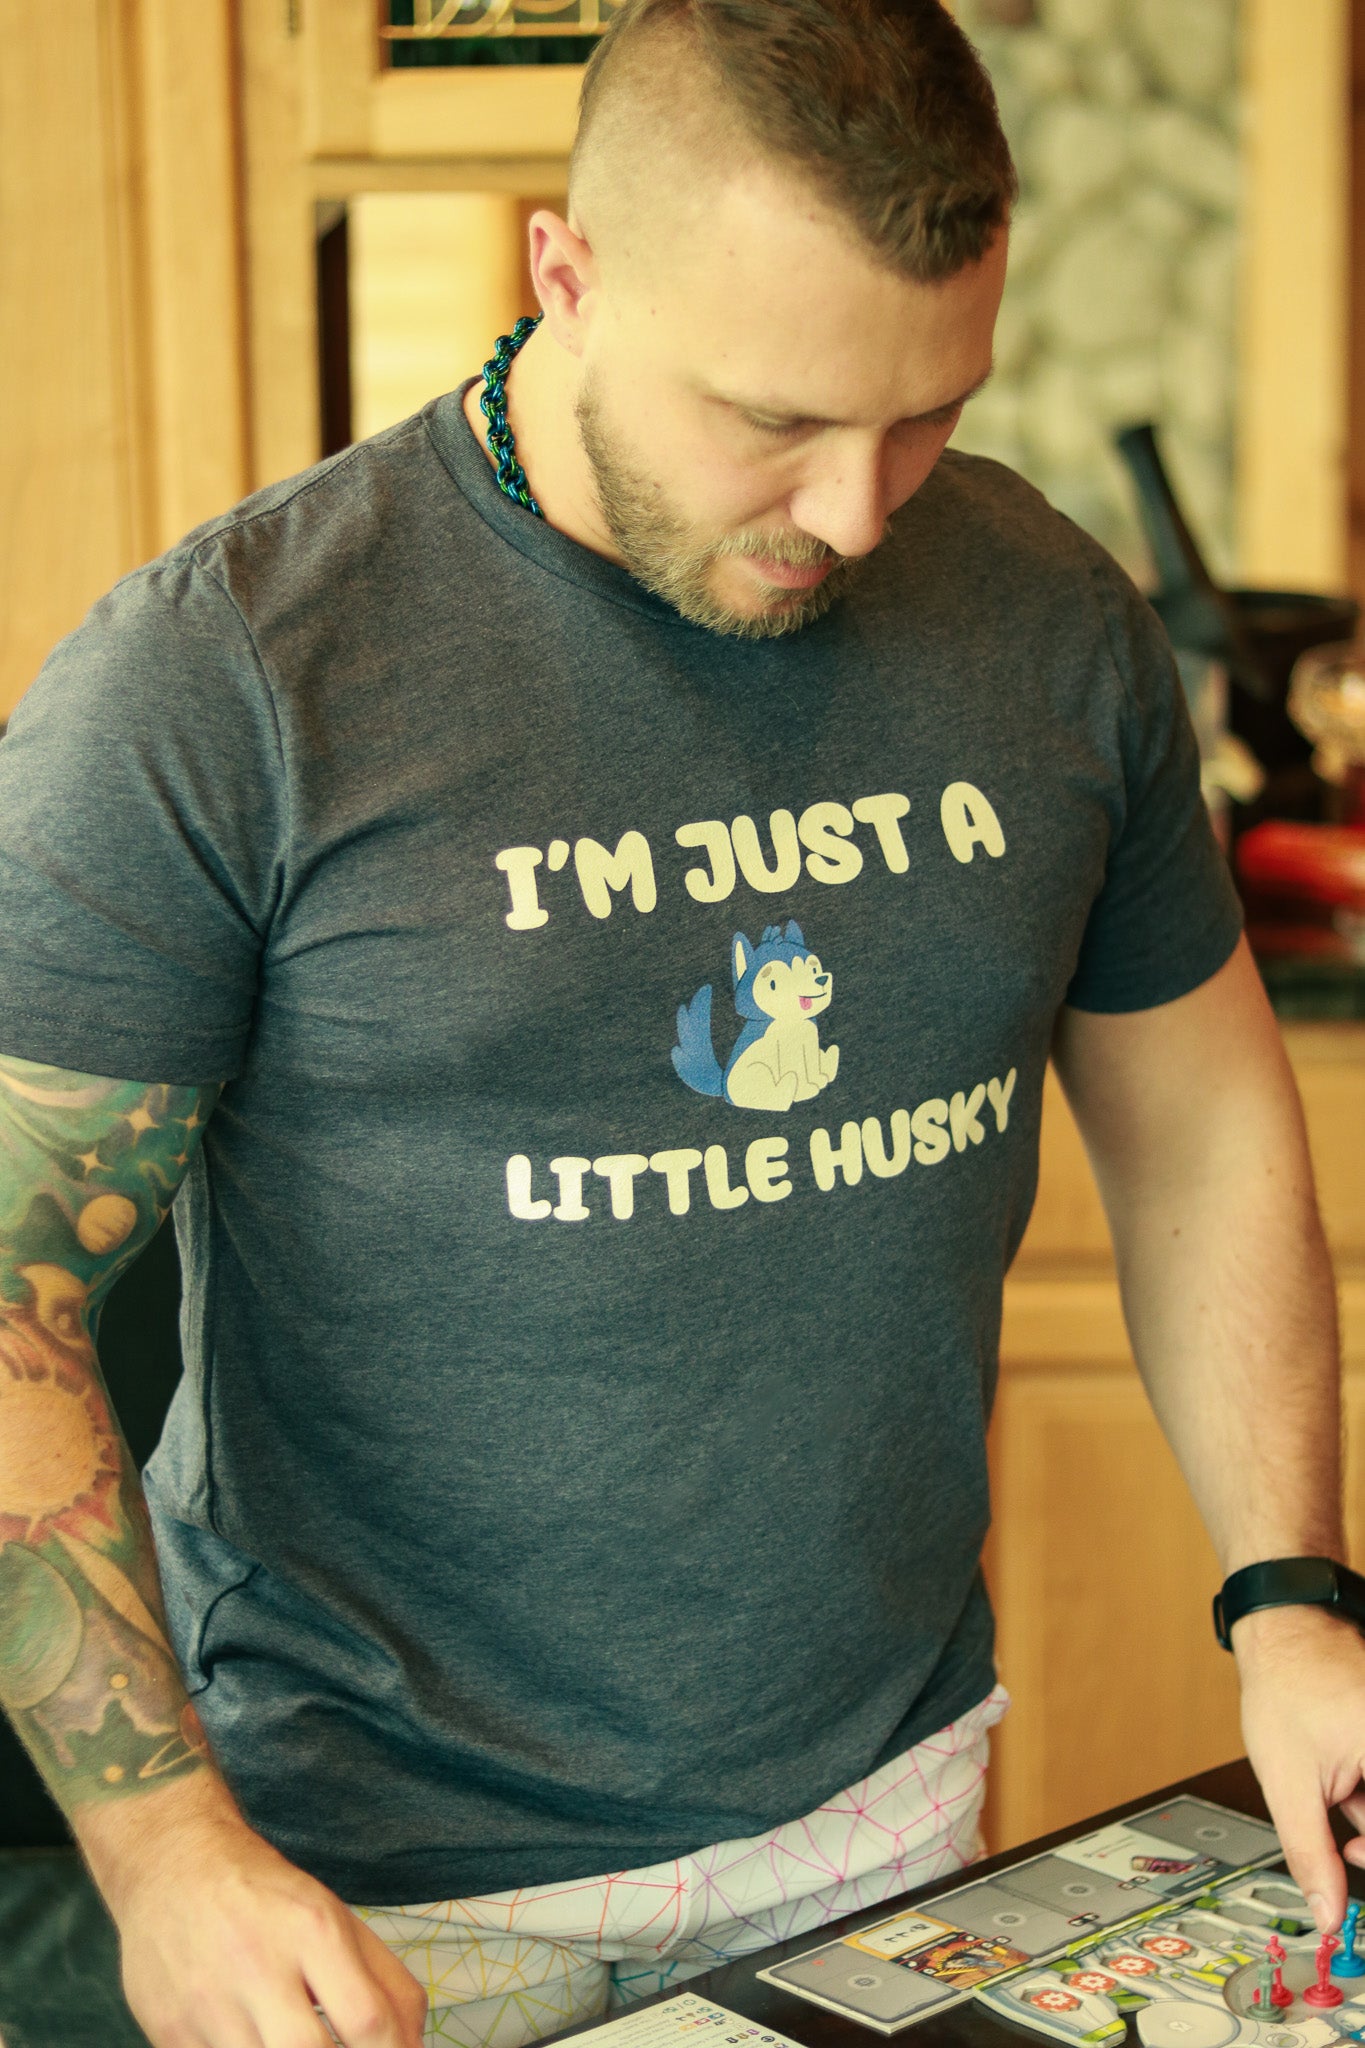 man with beard and tattoos playing boardgamesin wearing tshirt featuring image of small husky and text "I'm just a little husky"